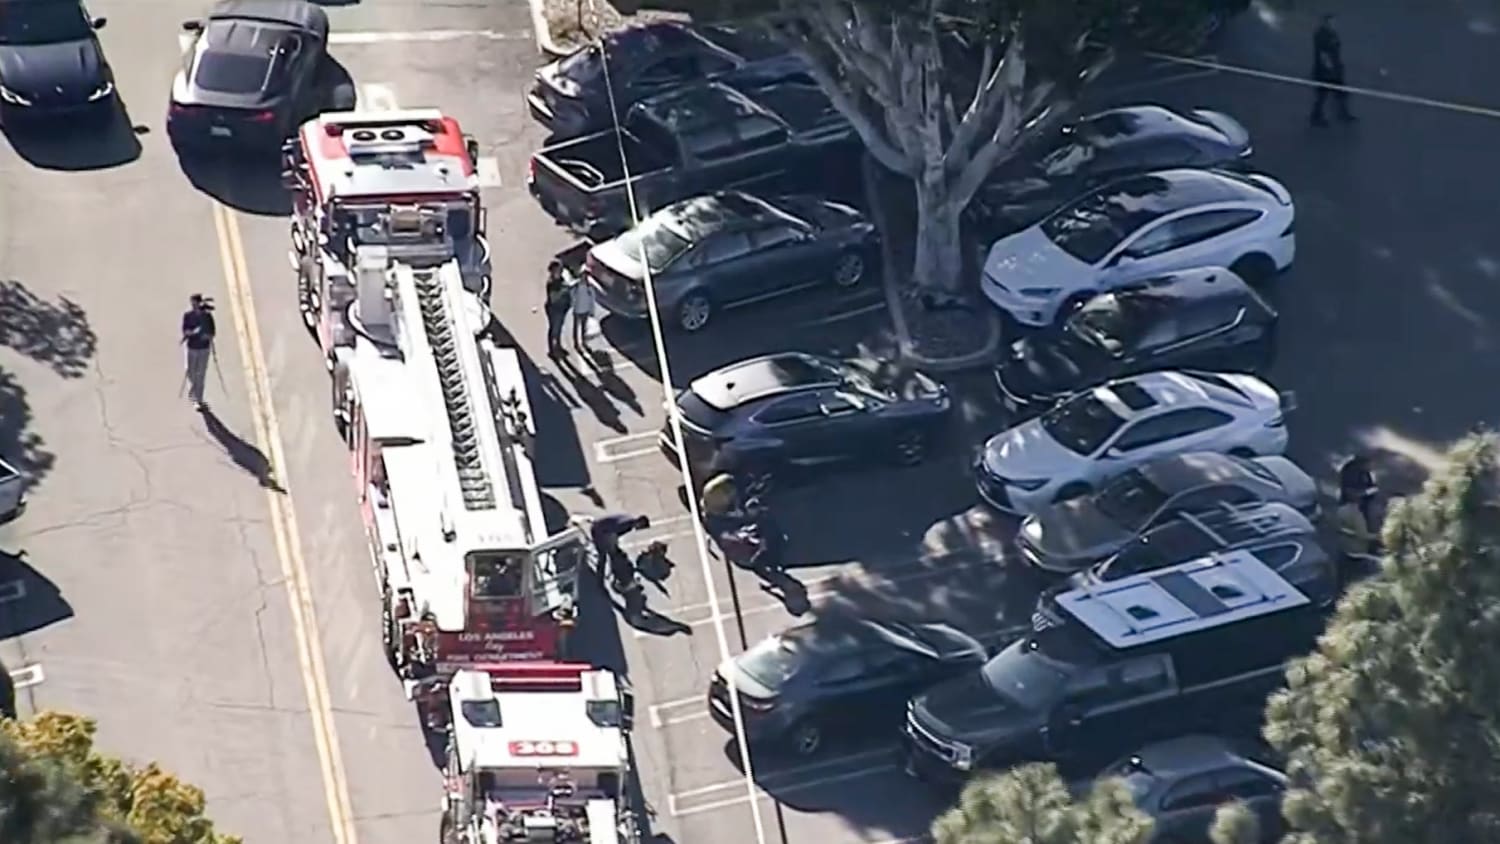 1 dead, 3 seriously wounded in shooting outside L.A. Trader Joe’s